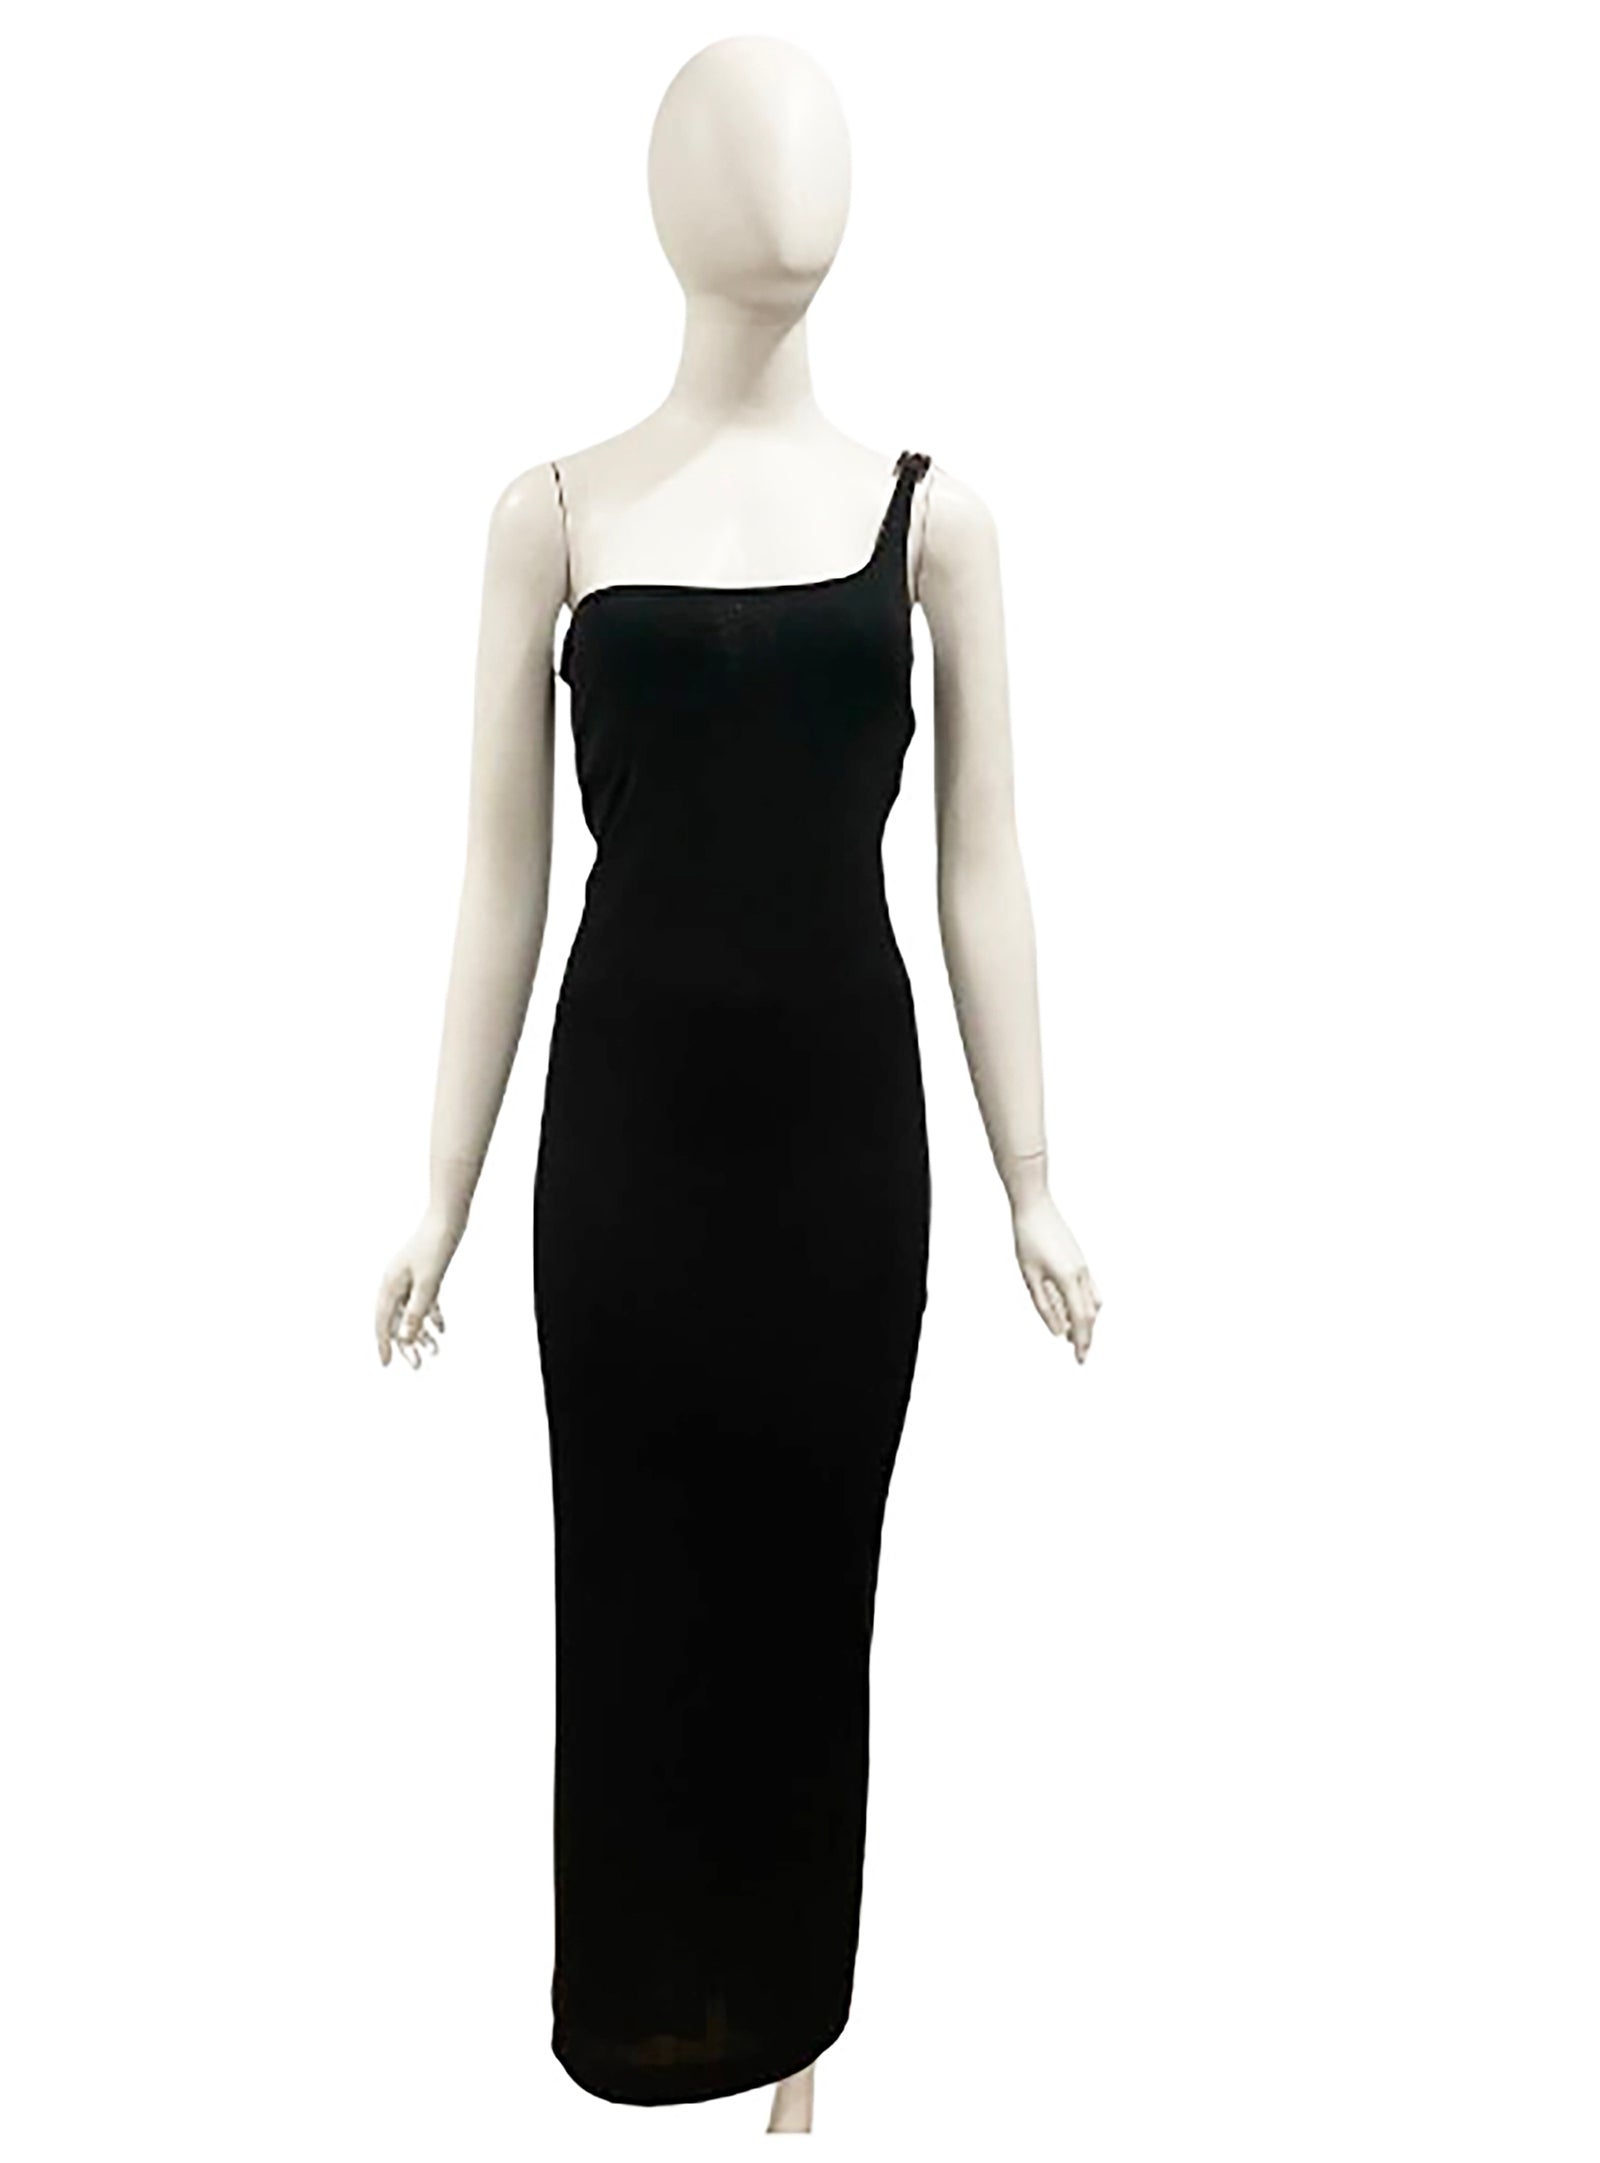 S/S 1998 Gucci by Tom Ford High Neck Black Bodystocking Maxi Dress